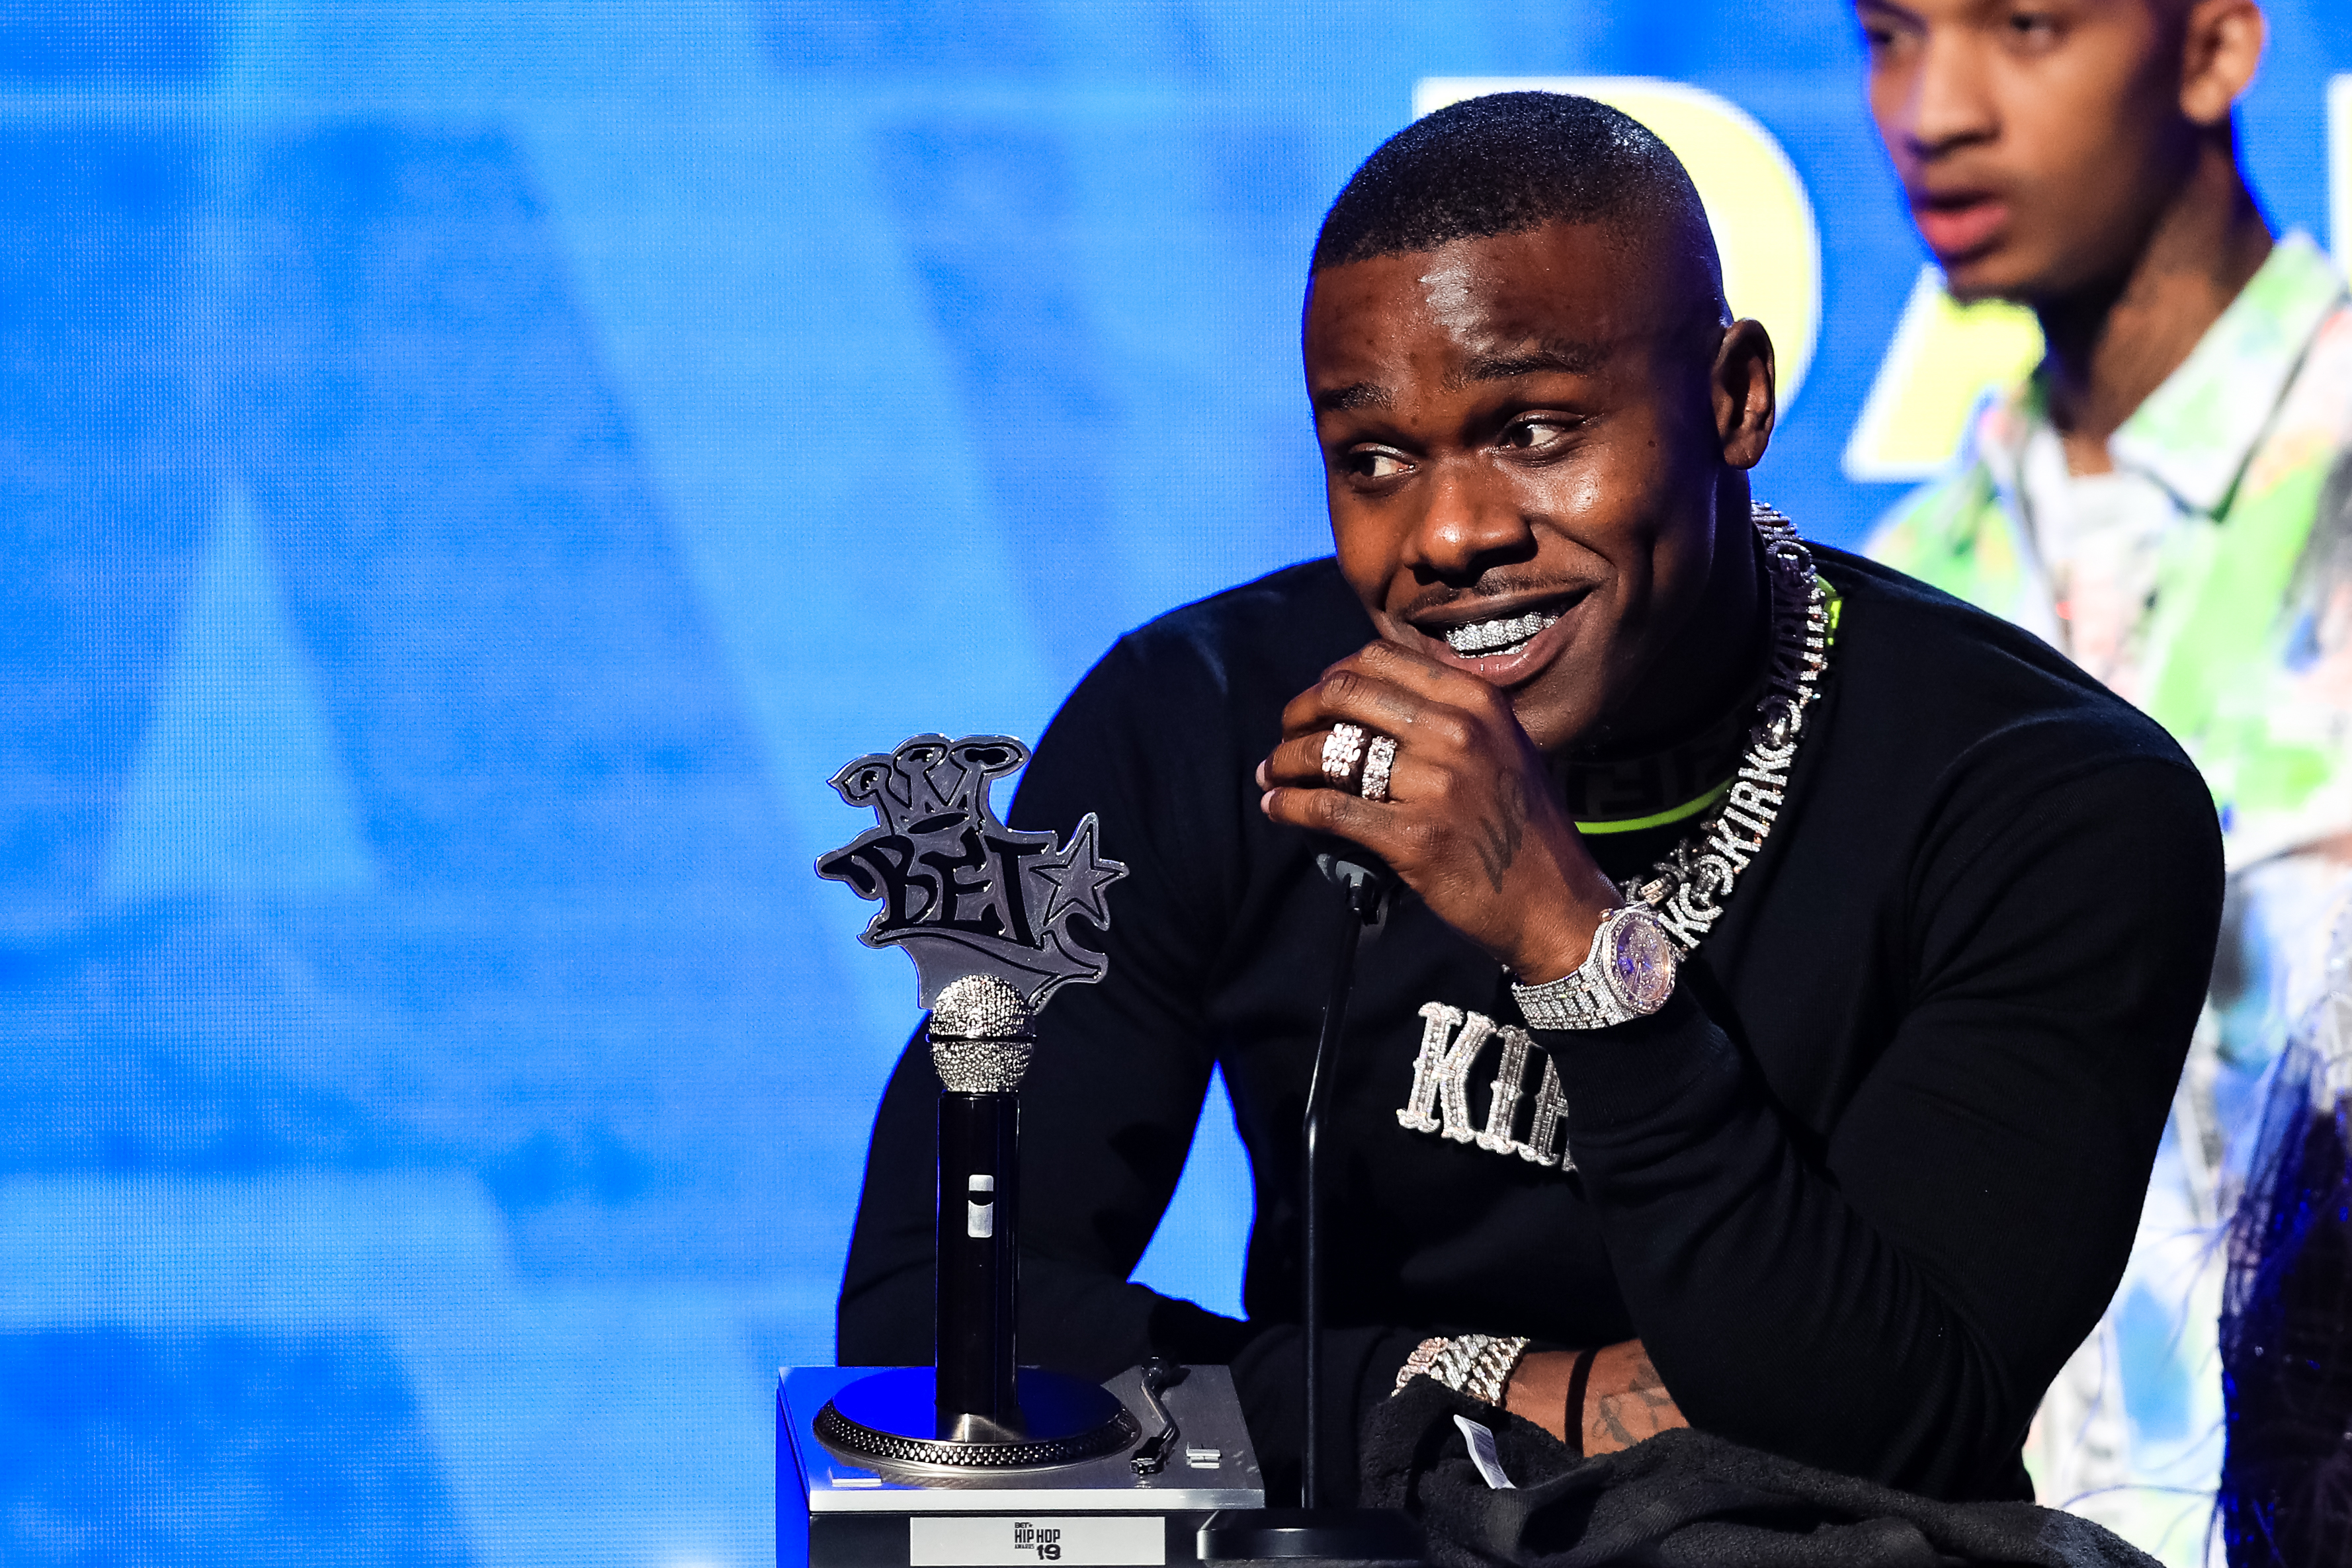 DaBaby Previews New Song On IG Live Following Release From Jail